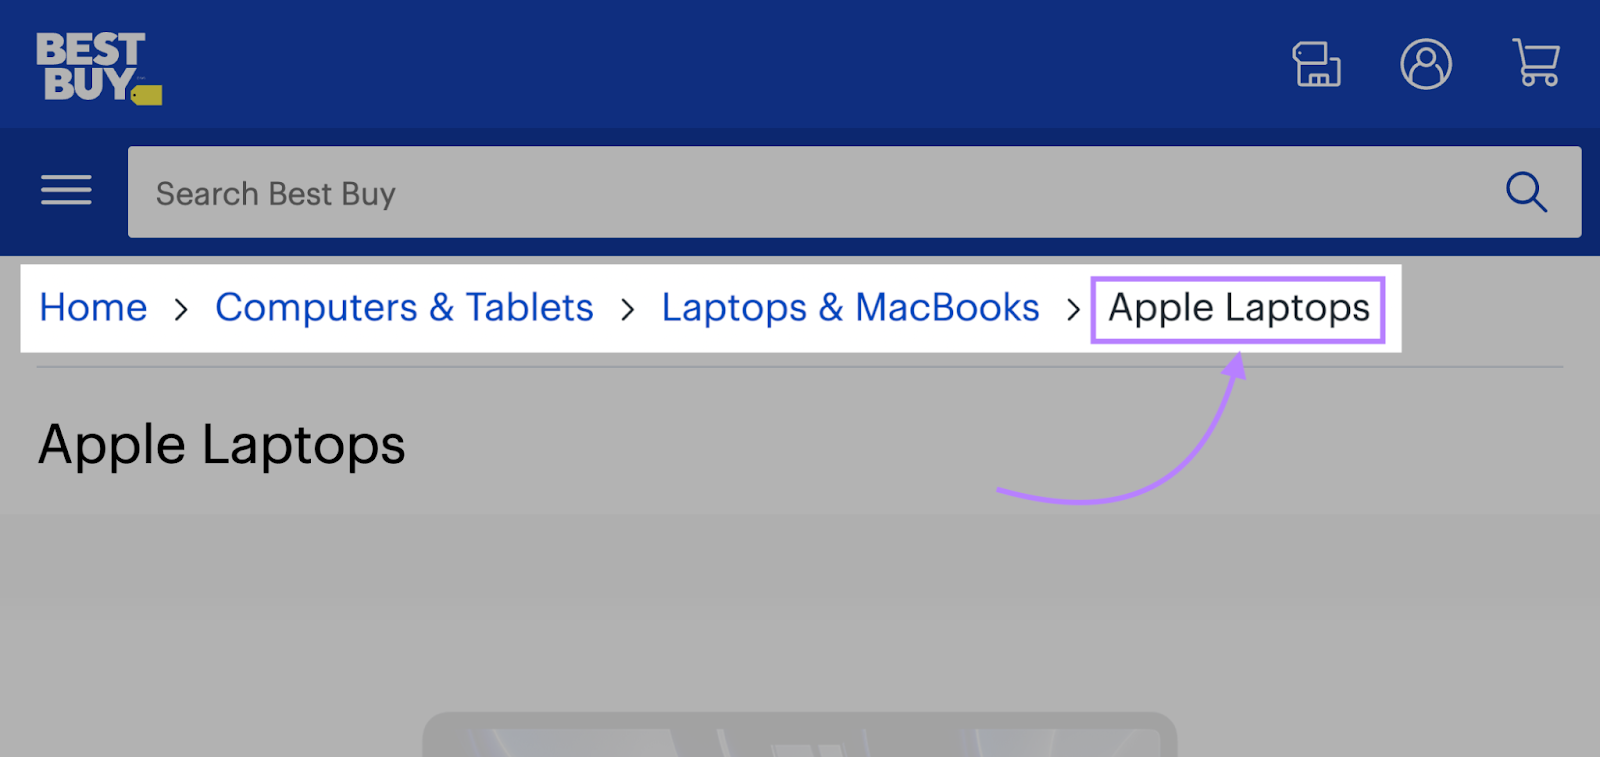 Best Buy's current page in the breadcrumb trail named "Apple Laptops"